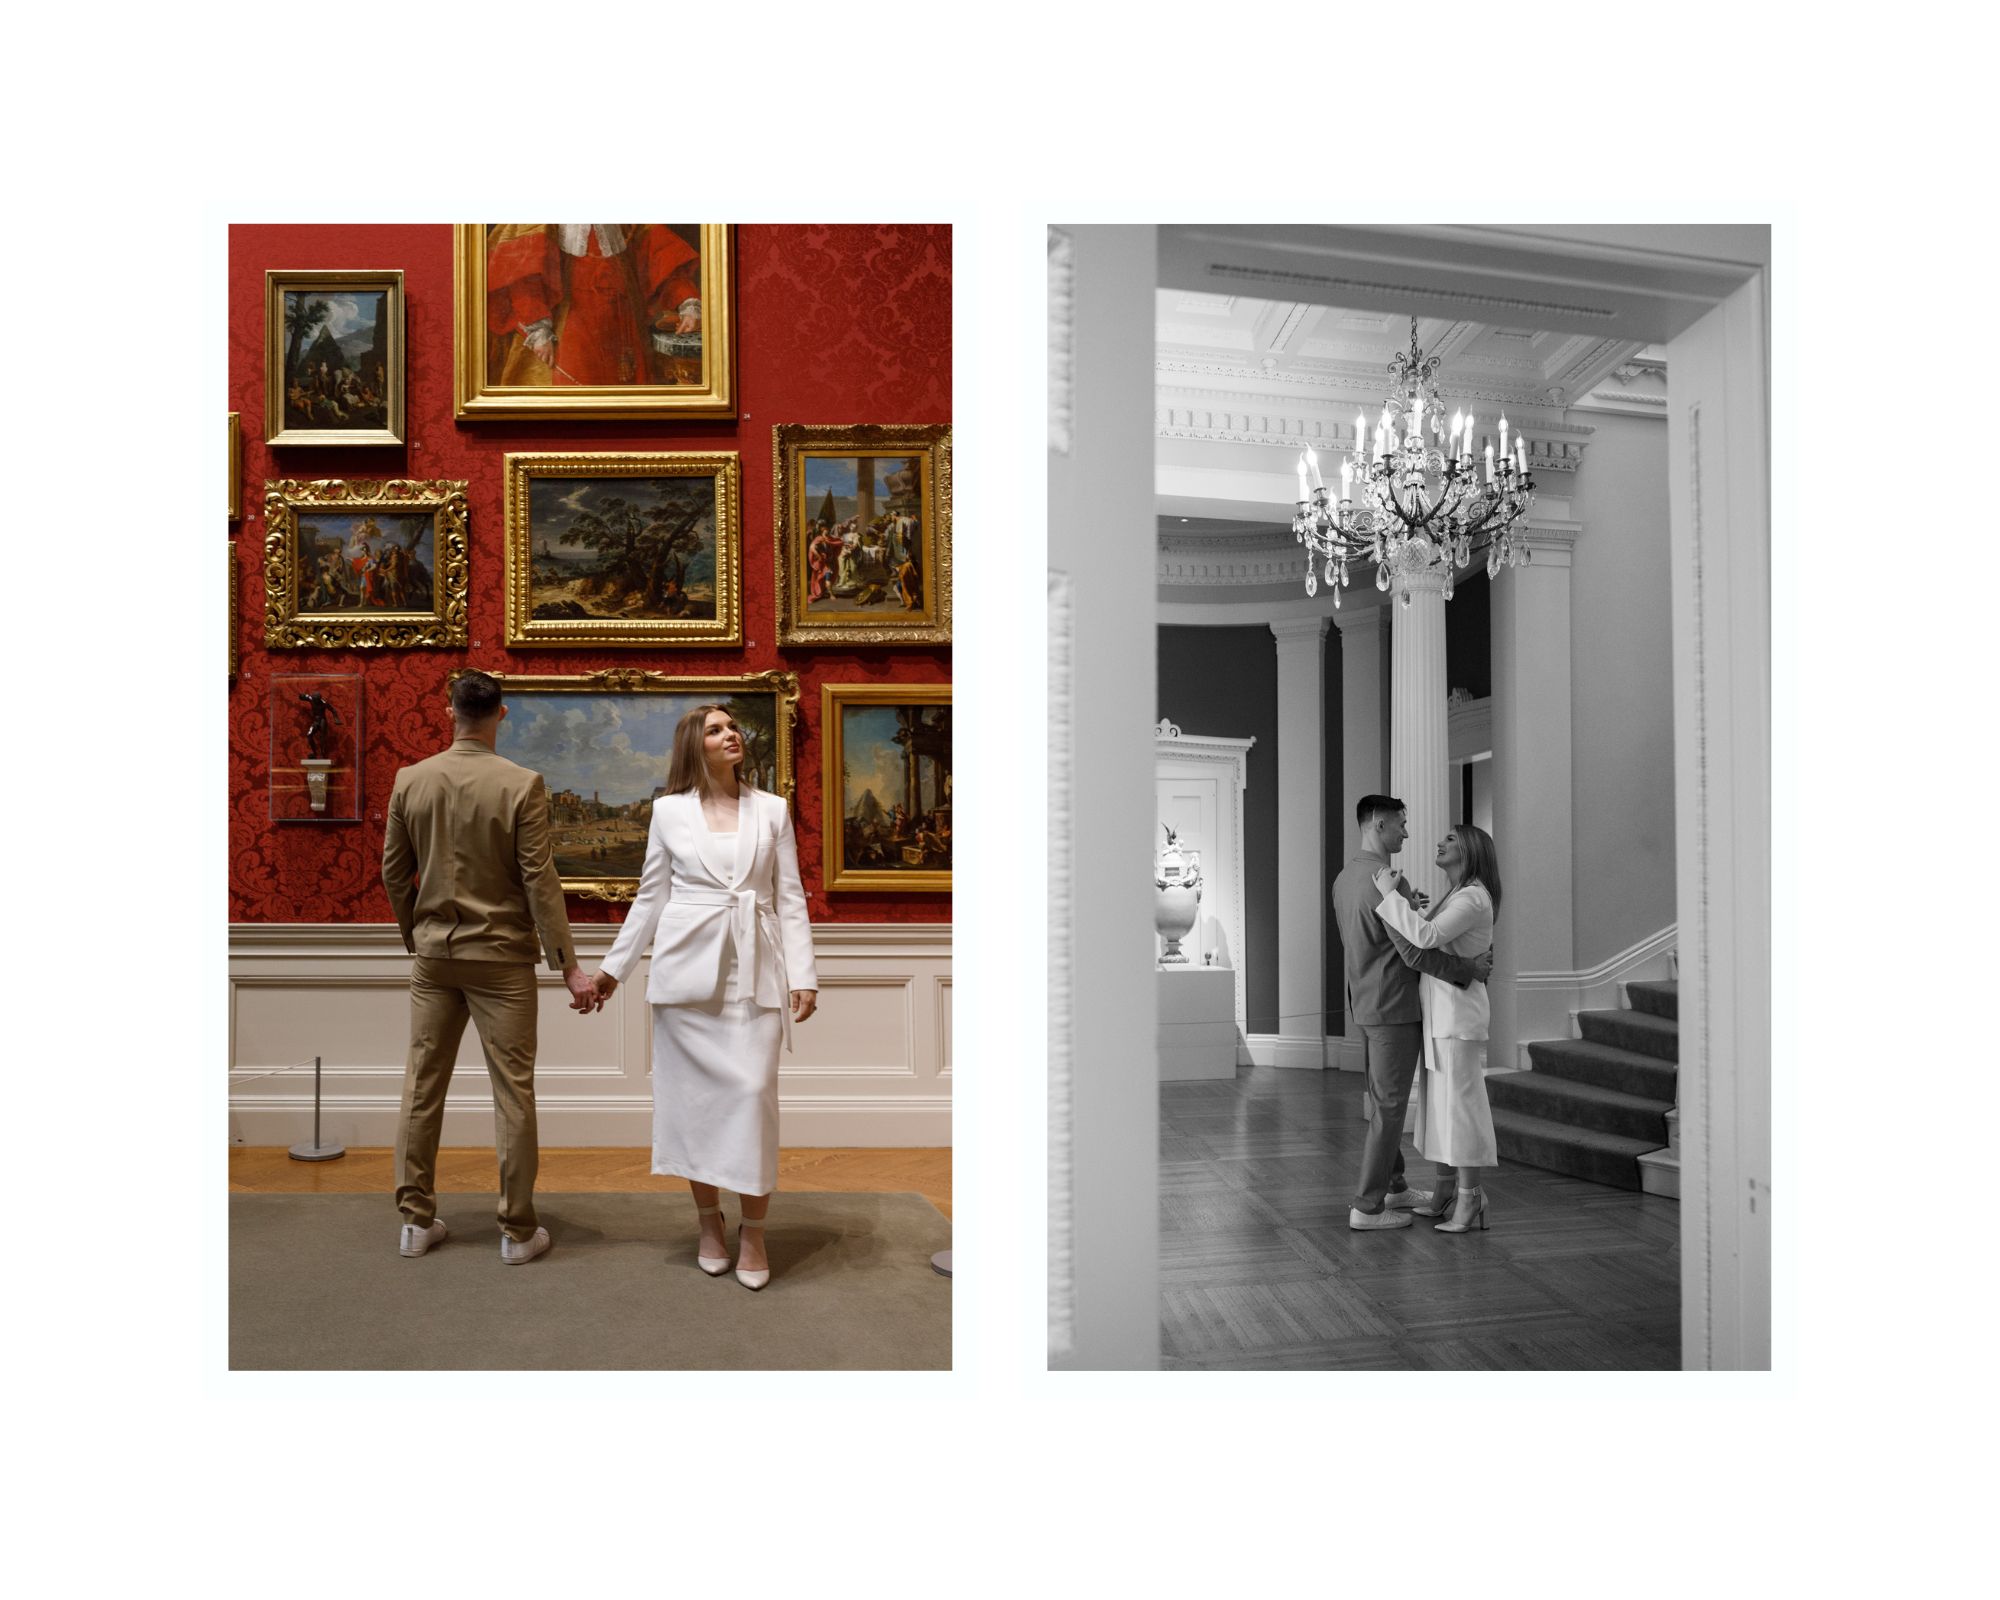 Unique art gallery engagement photos. The couple is holding hands in the photo on the left and slow dancing in the photo on the right.